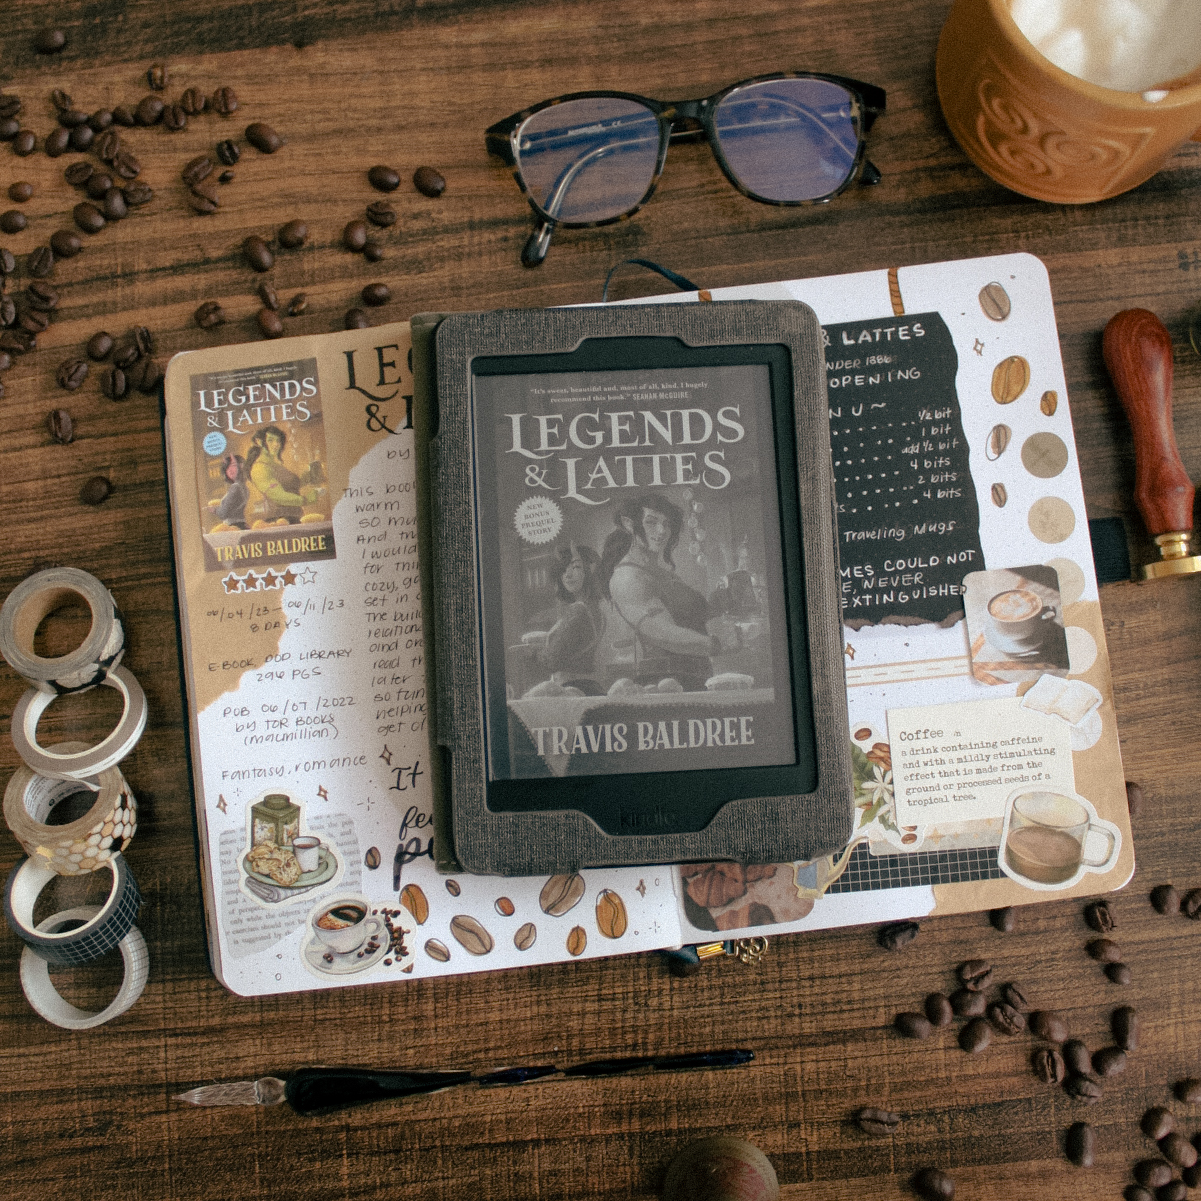 A flat-lay photo of the book Legends & Lattes by Travis Baldree. The book is lying on a reading journal book review spread for the book. On the table around it are plants and stationery elements.